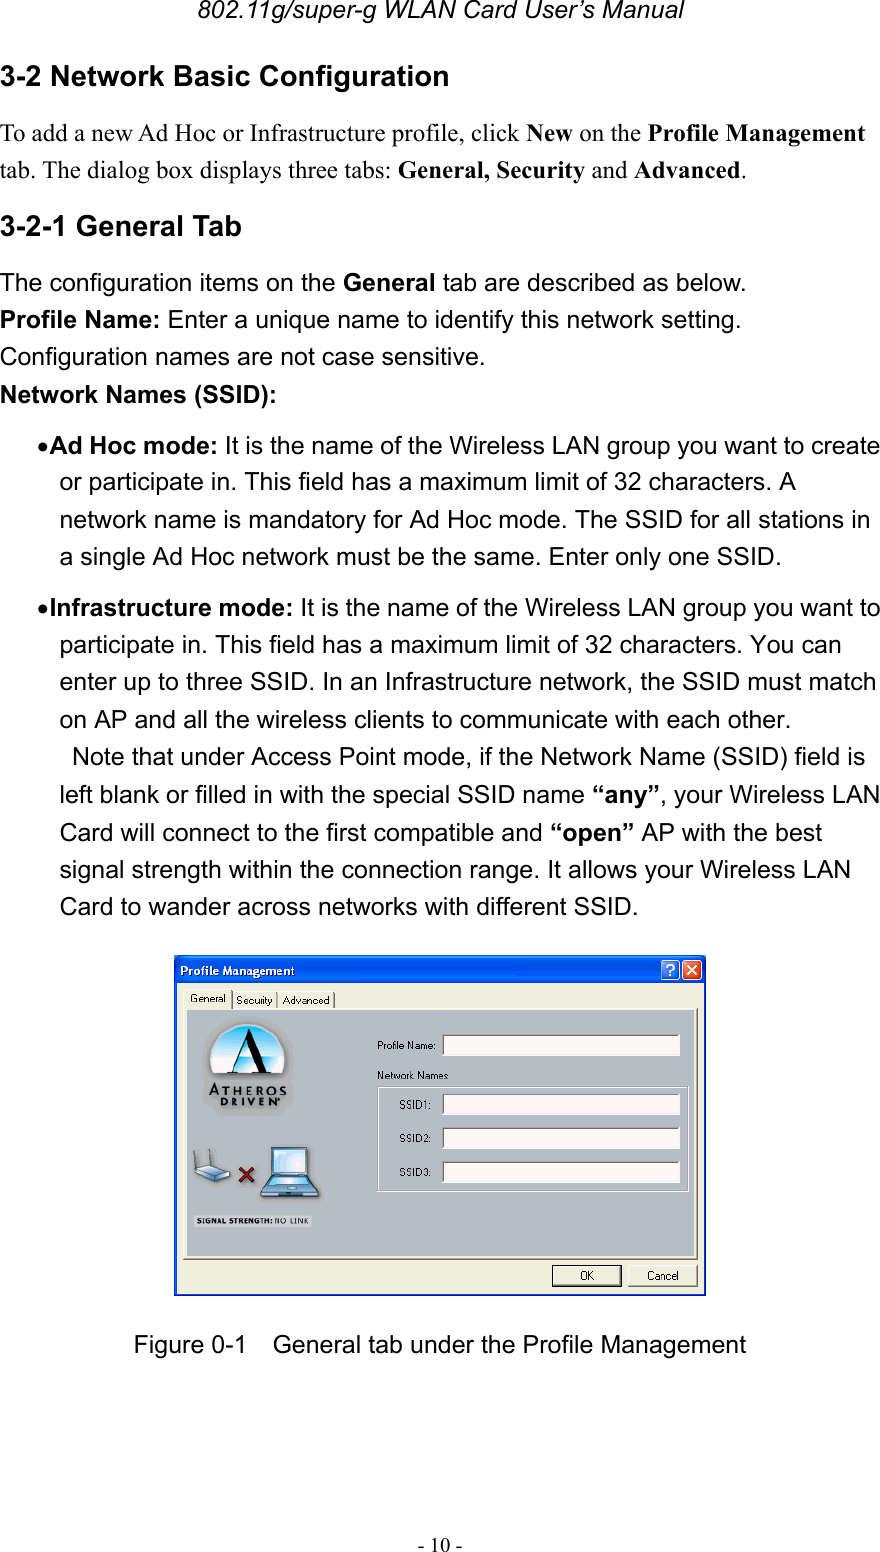 802.11g/super-g WLAN Card User’s Manual - 10 - 3-2 Network Basic Configuration To add a new Ad Hoc or Infrastructure profile, click New on the Profile Management tab. The dialog box displays three tabs: General, Security and Advanced.  3-2-1 General Tab The configuration items on the General tab are described as below. Profile Name: Enter a unique name to identify this network setting. Configuration names are not case sensitive. Network Names (SSID):  • Ad Hoc mode: It is the name of the Wireless LAN group you want to create or participate in. This field has a maximum limit of 32 characters. A network name is mandatory for Ad Hoc mode. The SSID for all stations in a single Ad Hoc network must be the same. Enter only one SSID. • Infrastructure mode: It is the name of the Wireless LAN group you want to participate in. This field has a maximum limit of 32 characters. You can enter up to three SSID. In an Infrastructure network, the SSID must match on AP and all the wireless clients to communicate with each other.   Note that under Access Point mode, if the Network Name (SSID) field is left blank or filled in with the special SSID name “any”, your Wireless LAN Card will connect to the first compatible and “open” AP with the best signal strength within the connection range. It allows your Wireless LAN Card to wander across networks with different SSID.  Figure 0-1  General tab under the Profile Management  